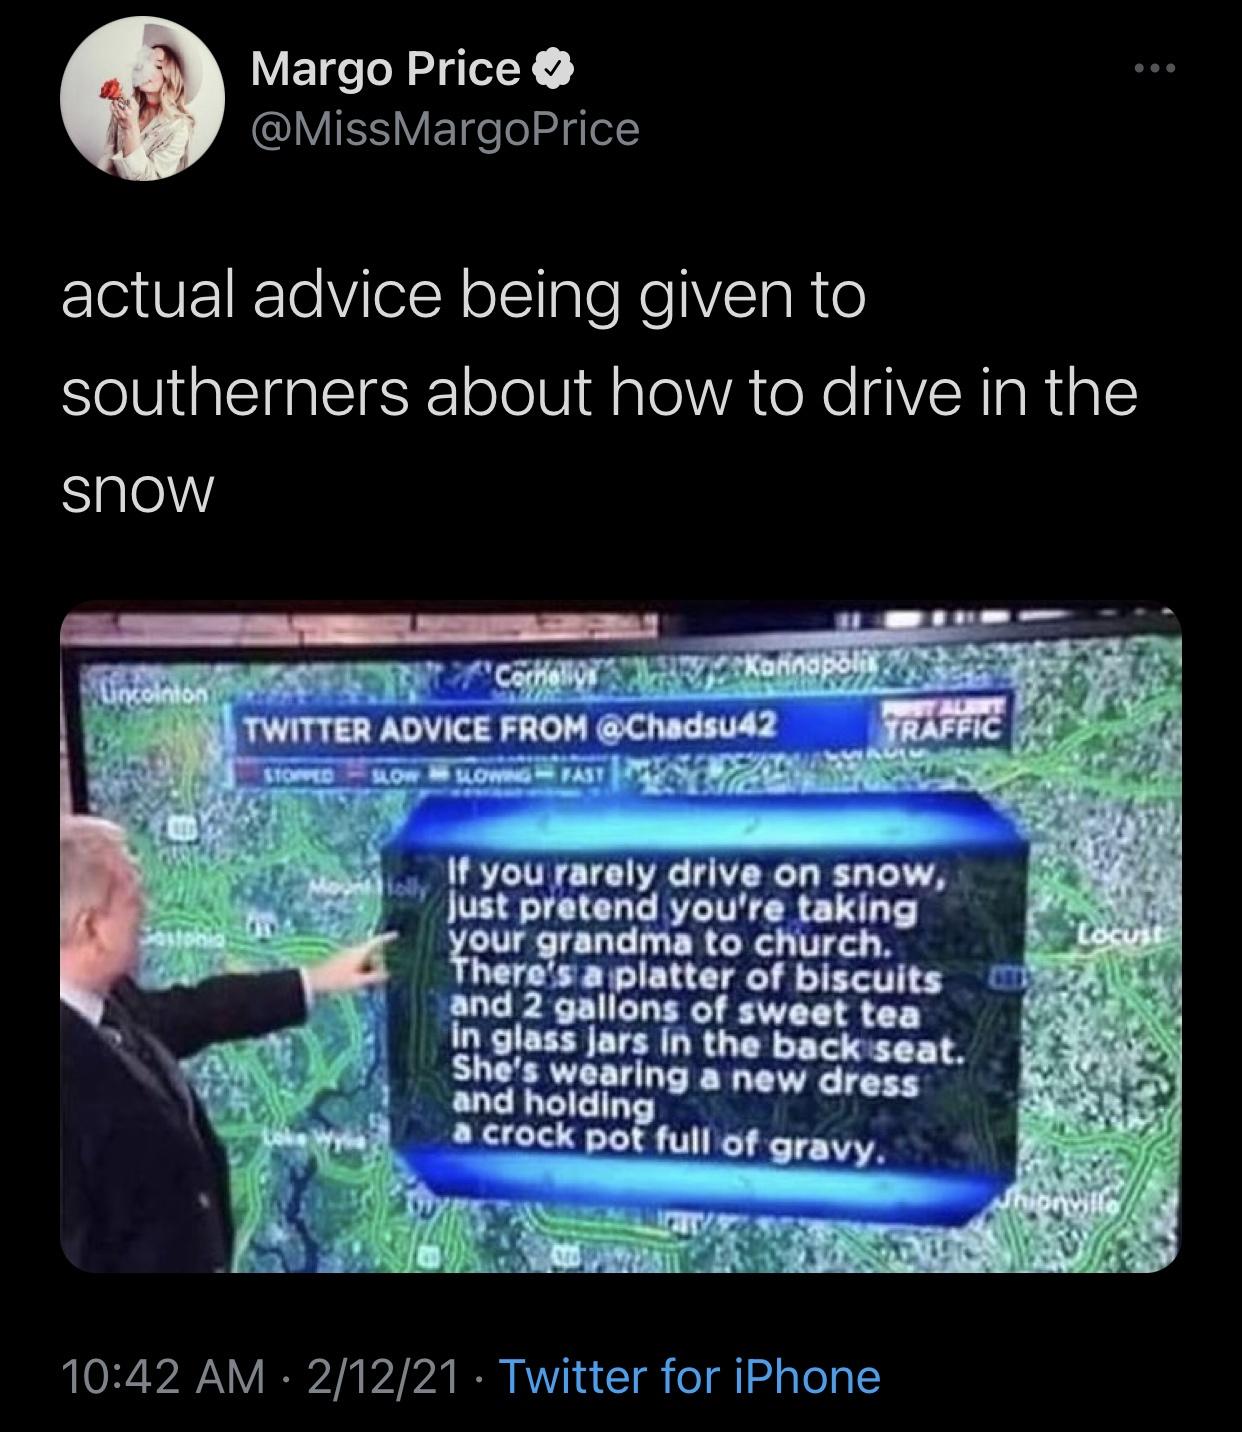 advice for driving in snow - Margo Price actual advice being given to southerners about how to drive in the Snow Oncolmon "Corhol Kannapoli Twitter Advice From Traffic Storld Low Llow Fast 'Locust If you rarely drive on snow, Just pretend you're taking yo